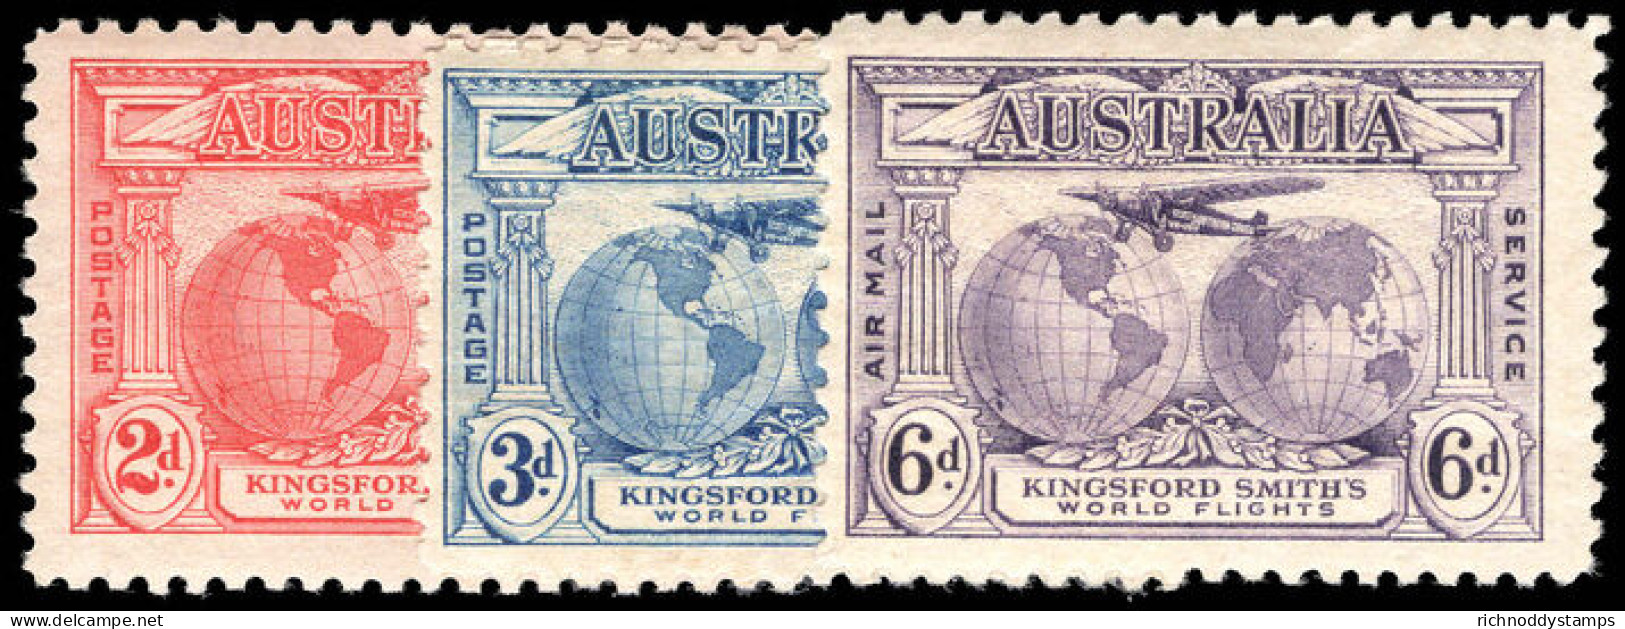 Australia 1931 Kingsford Smith's Flights Lightly Mounted Mint. - Mint Stamps